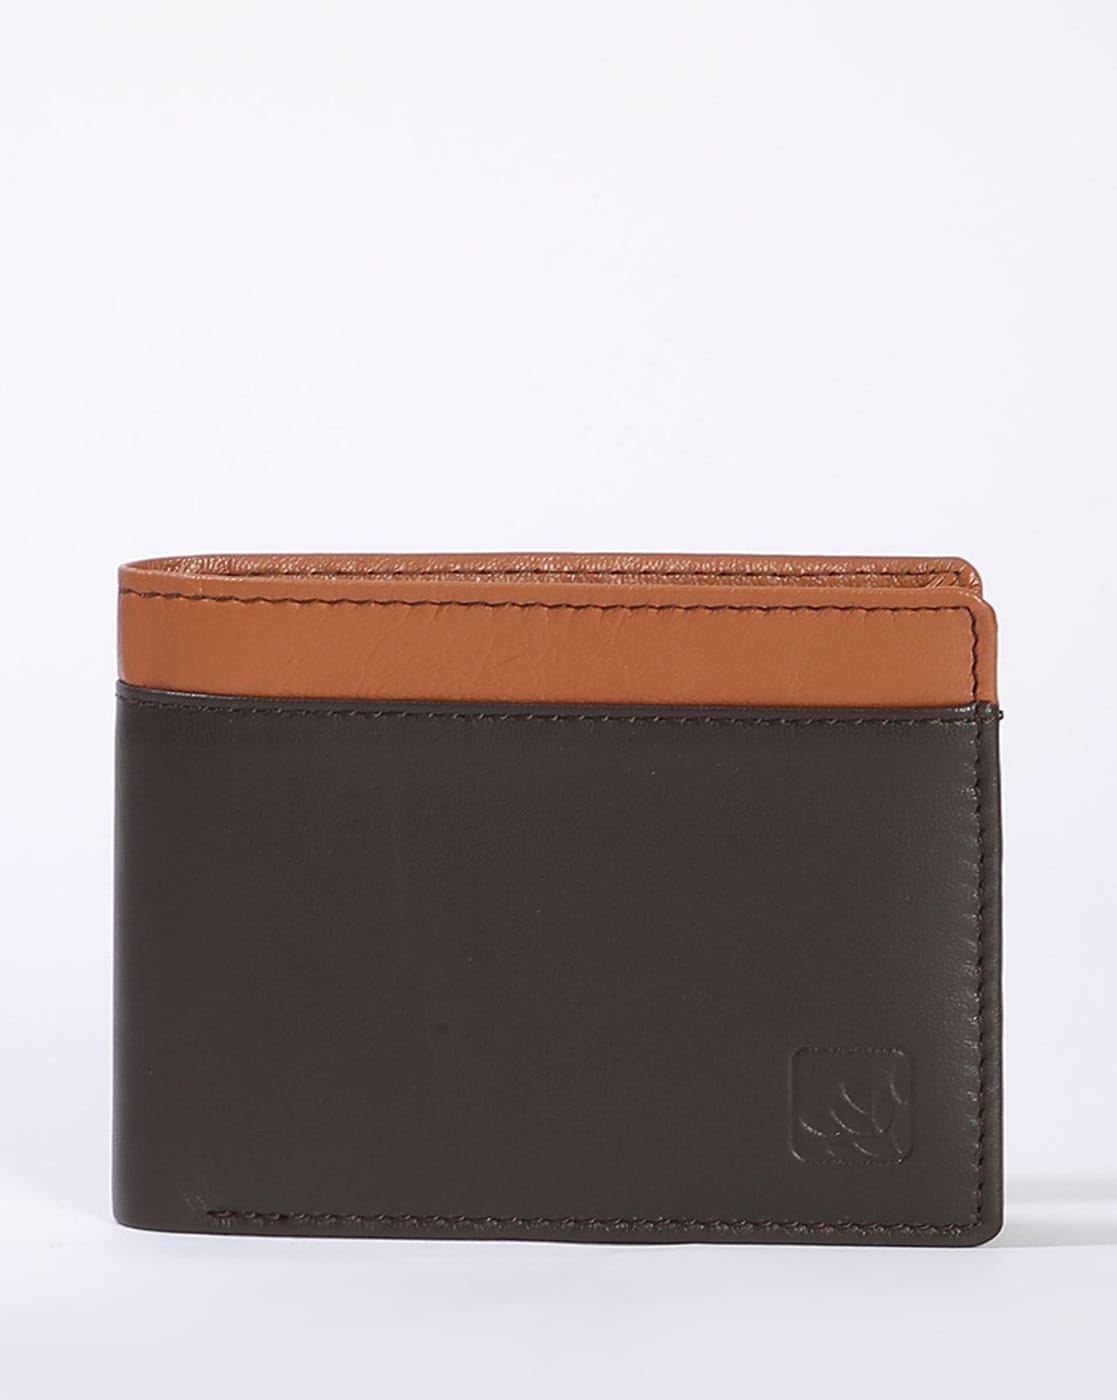 Wallet for Men in Leather Wooodland Tan/Brown Colour